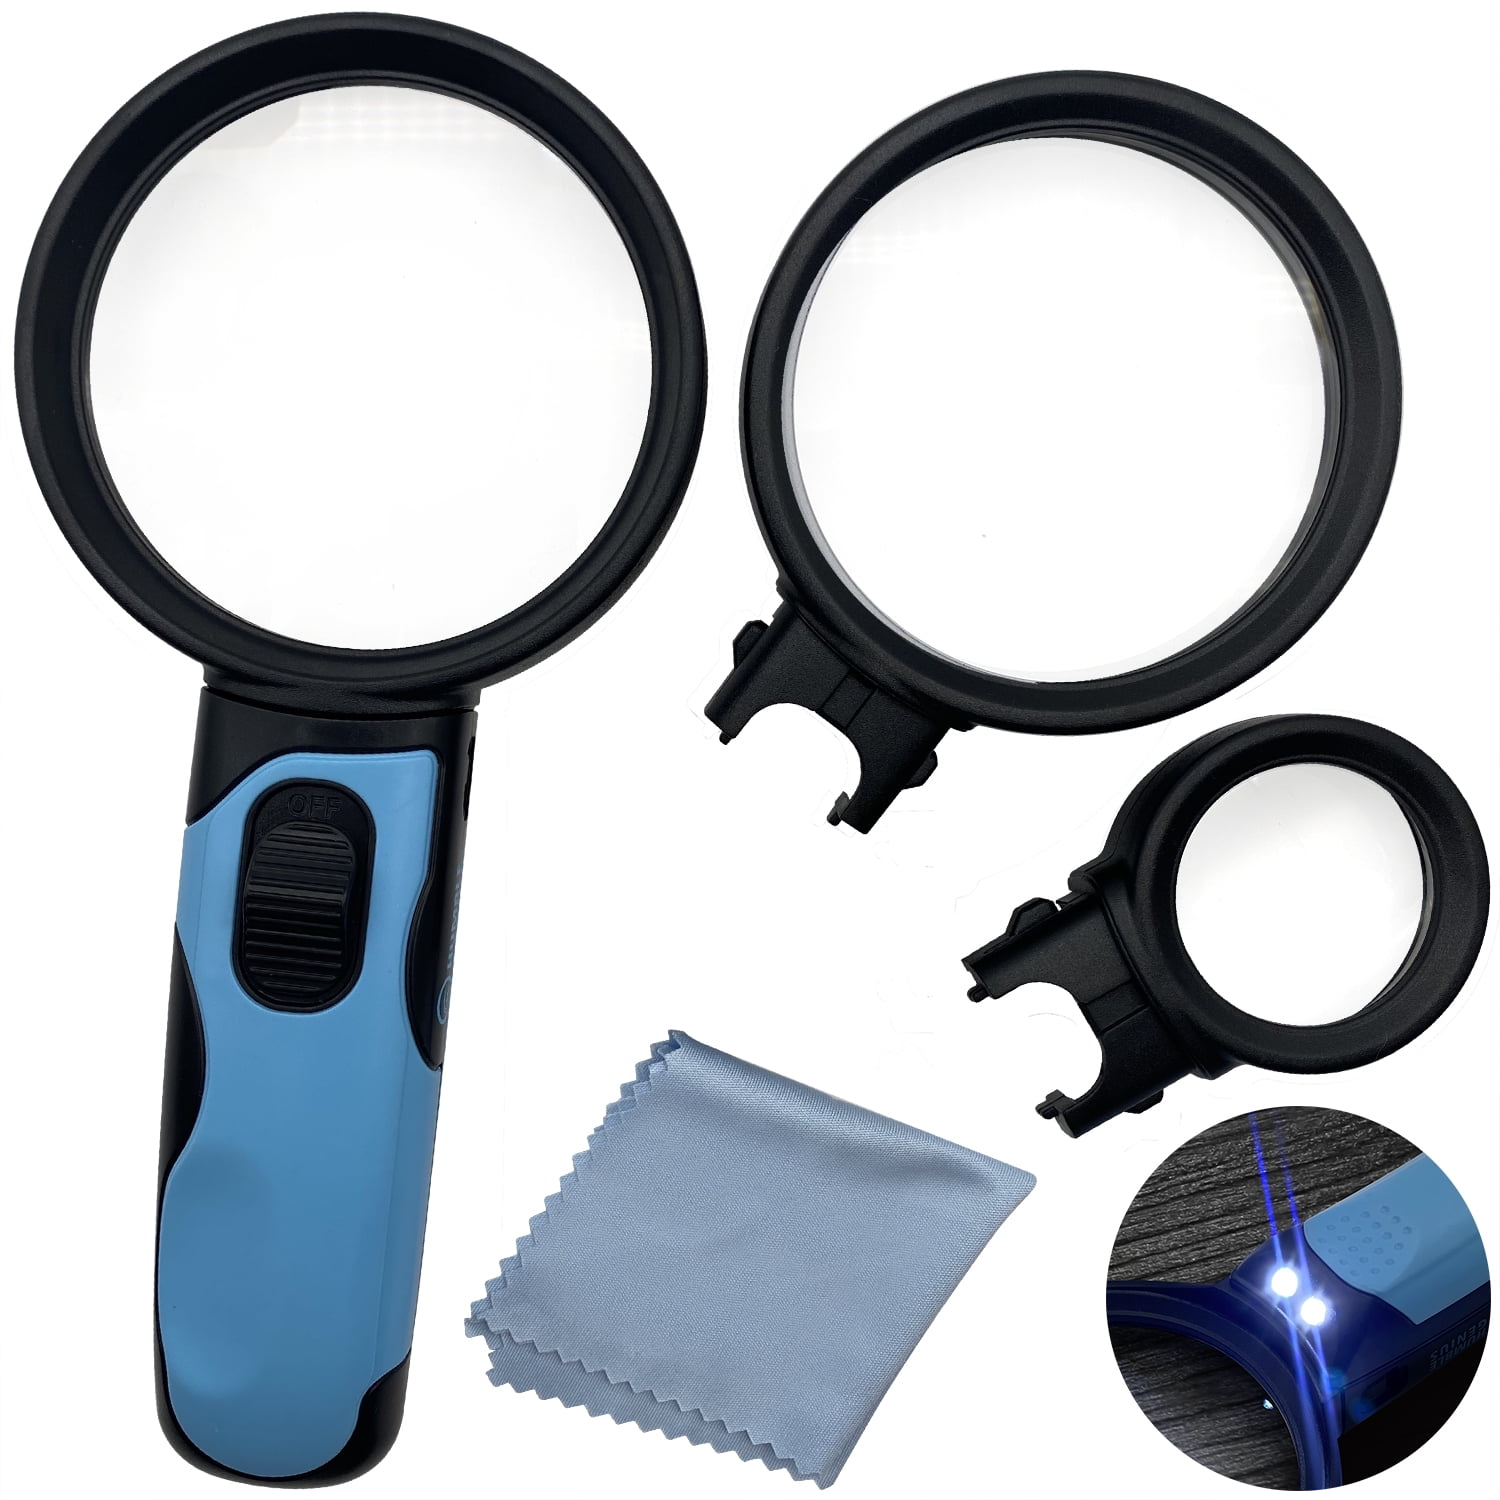 3-in-1 LED Hands-Free Hobby Magnifier Set with Interchangable Lenses